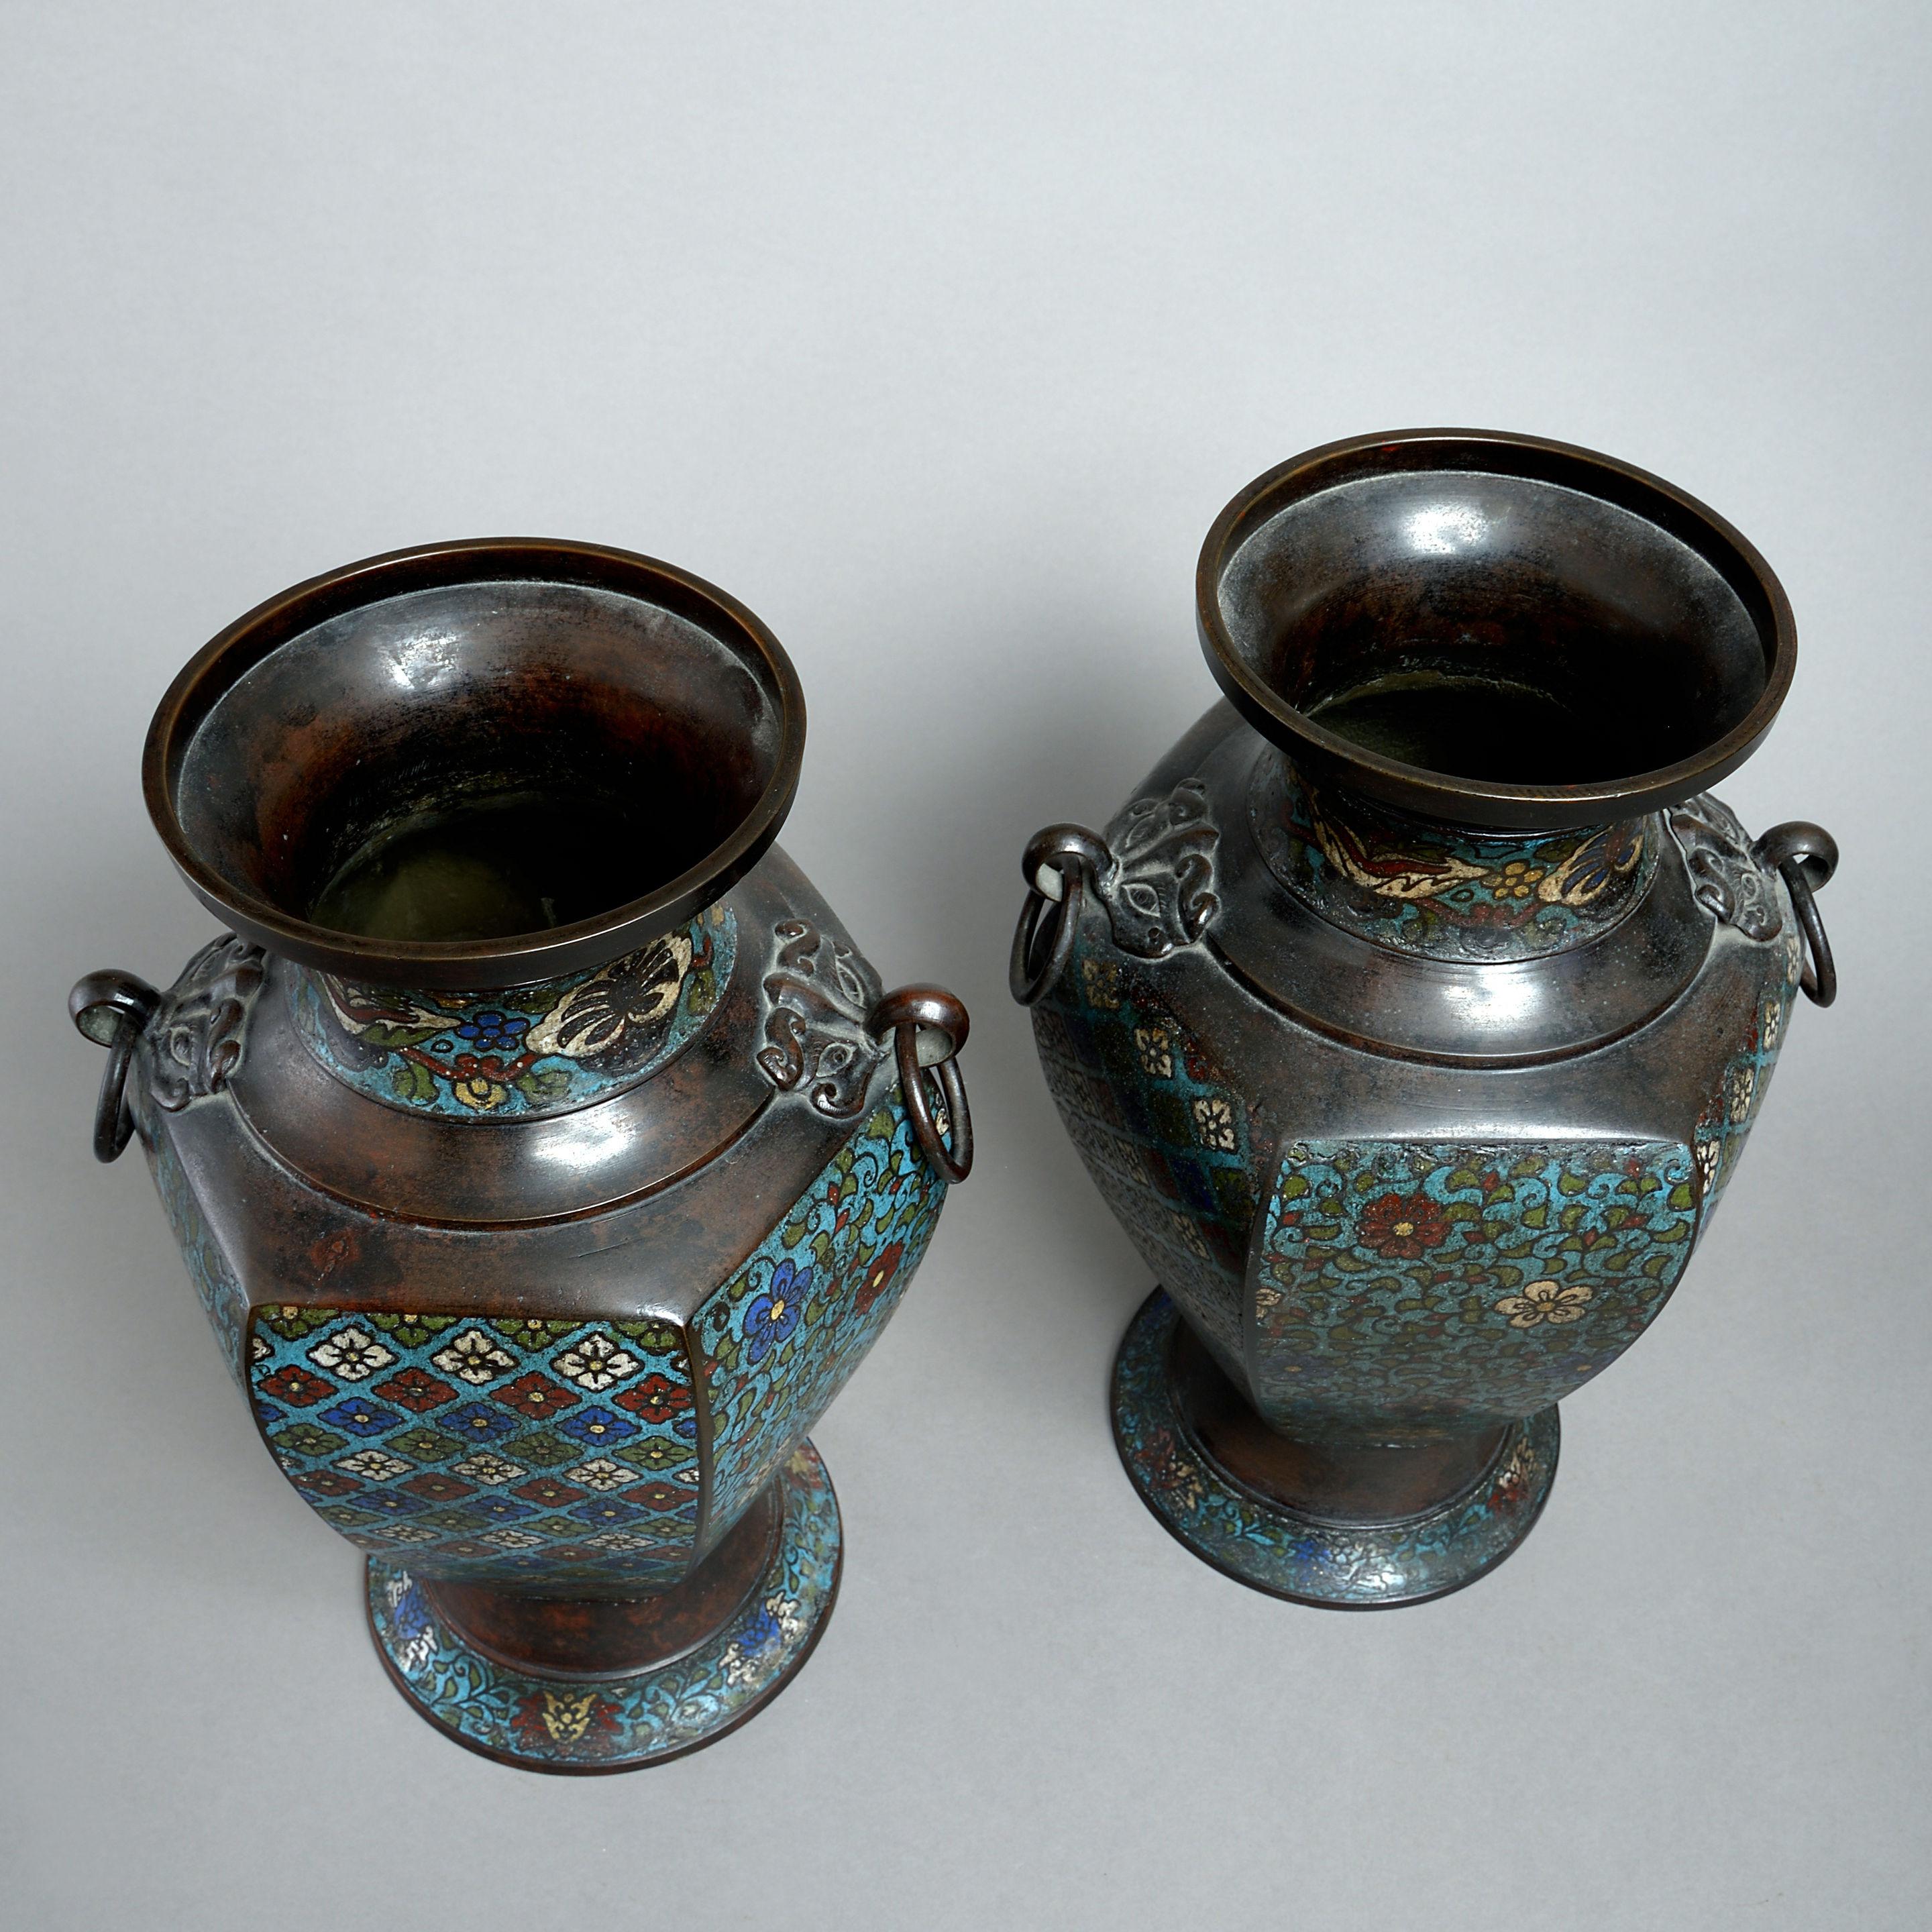 Chinese 19th Century Pair of Cloisonné Vases